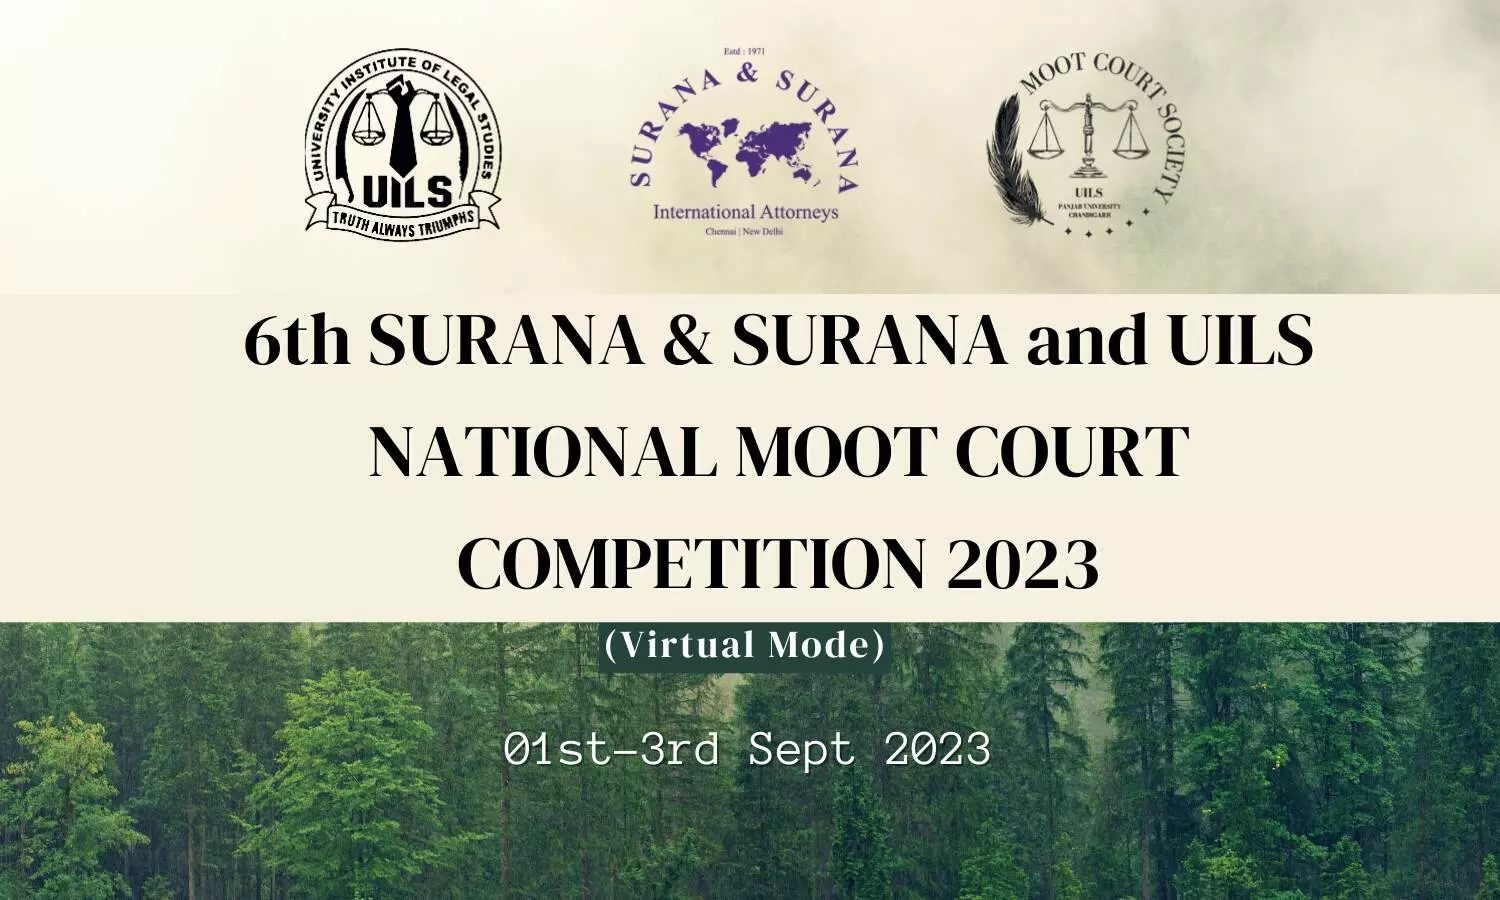 6th Surana & Surana and UILS National Moot Court Competition 2023